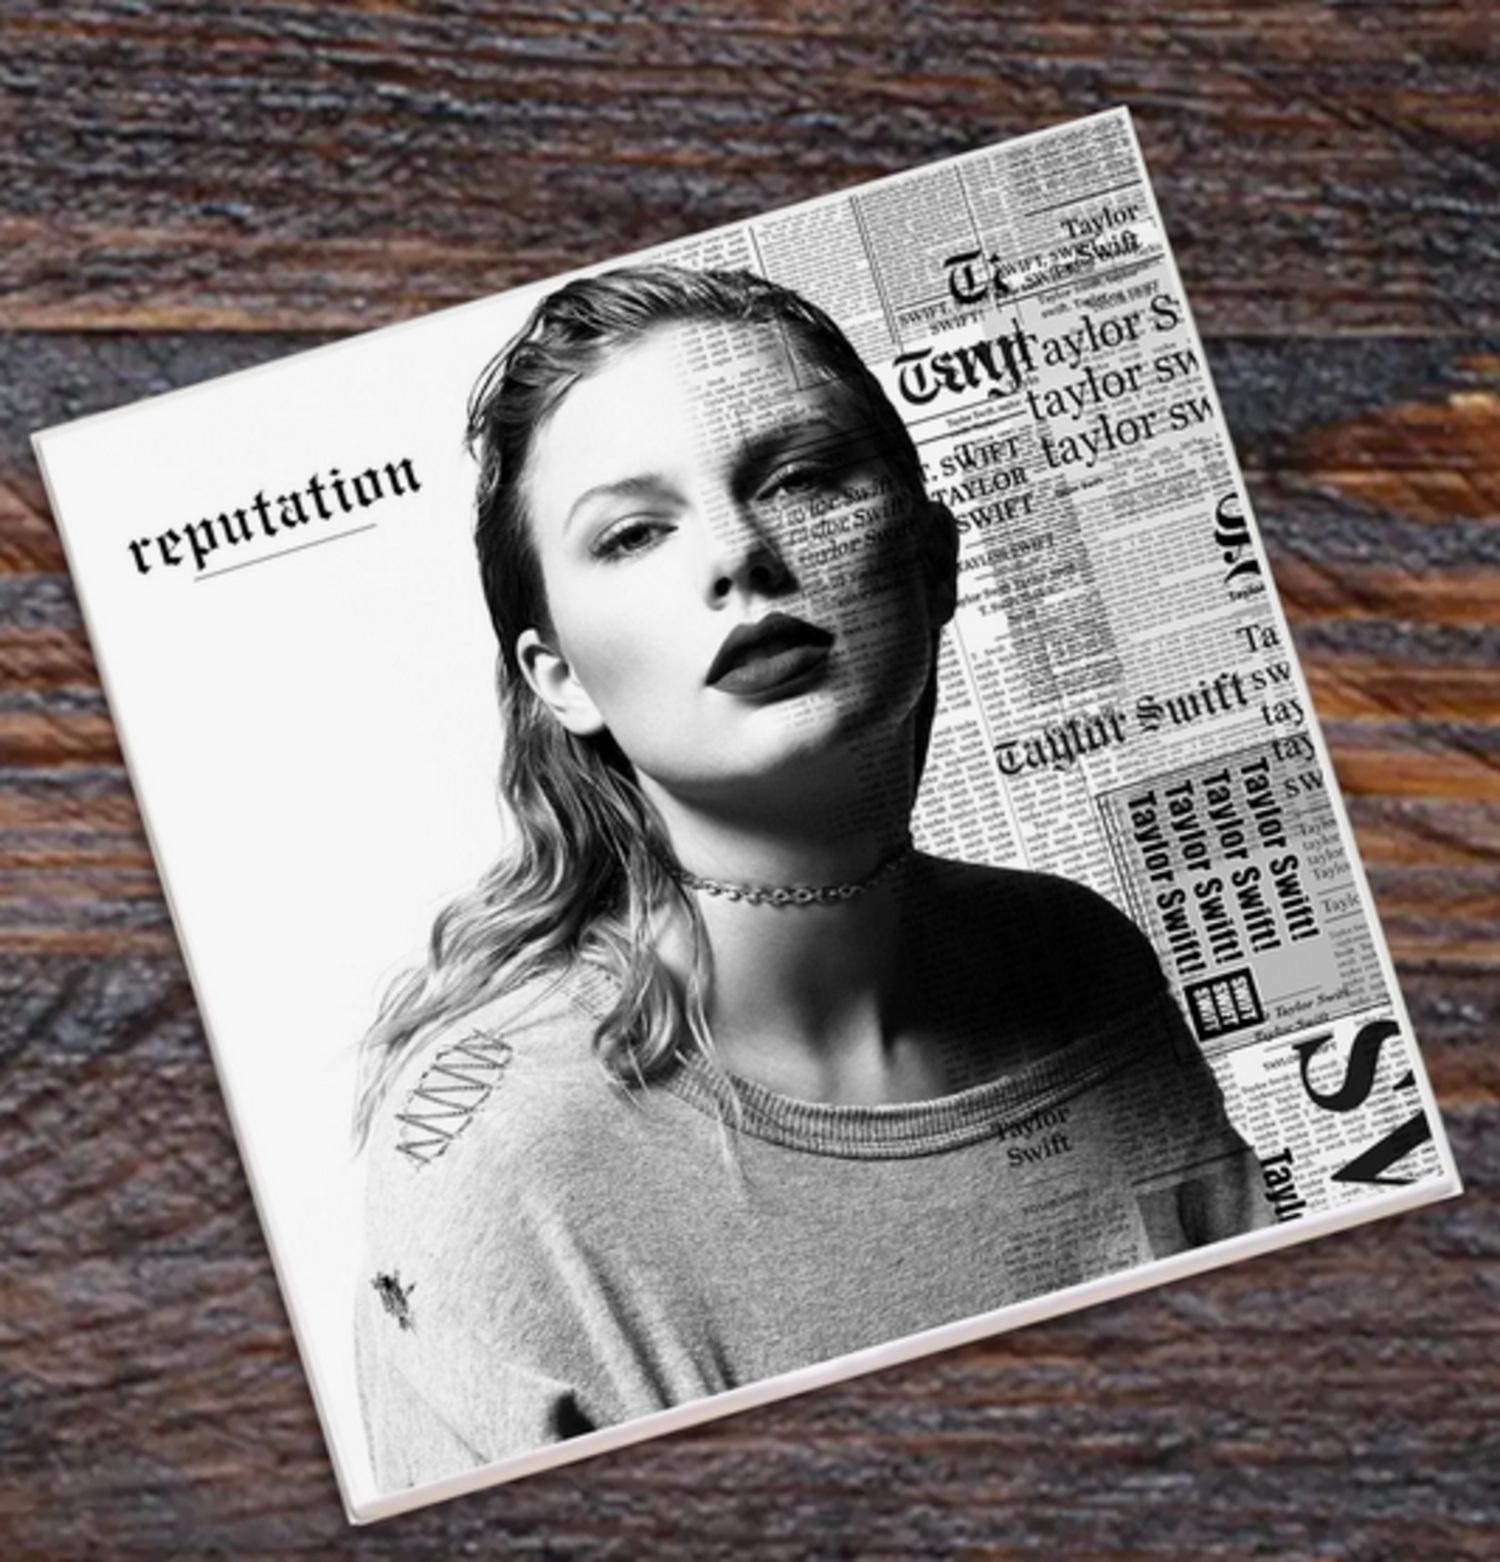 31205-The album cover-Taylor Swift